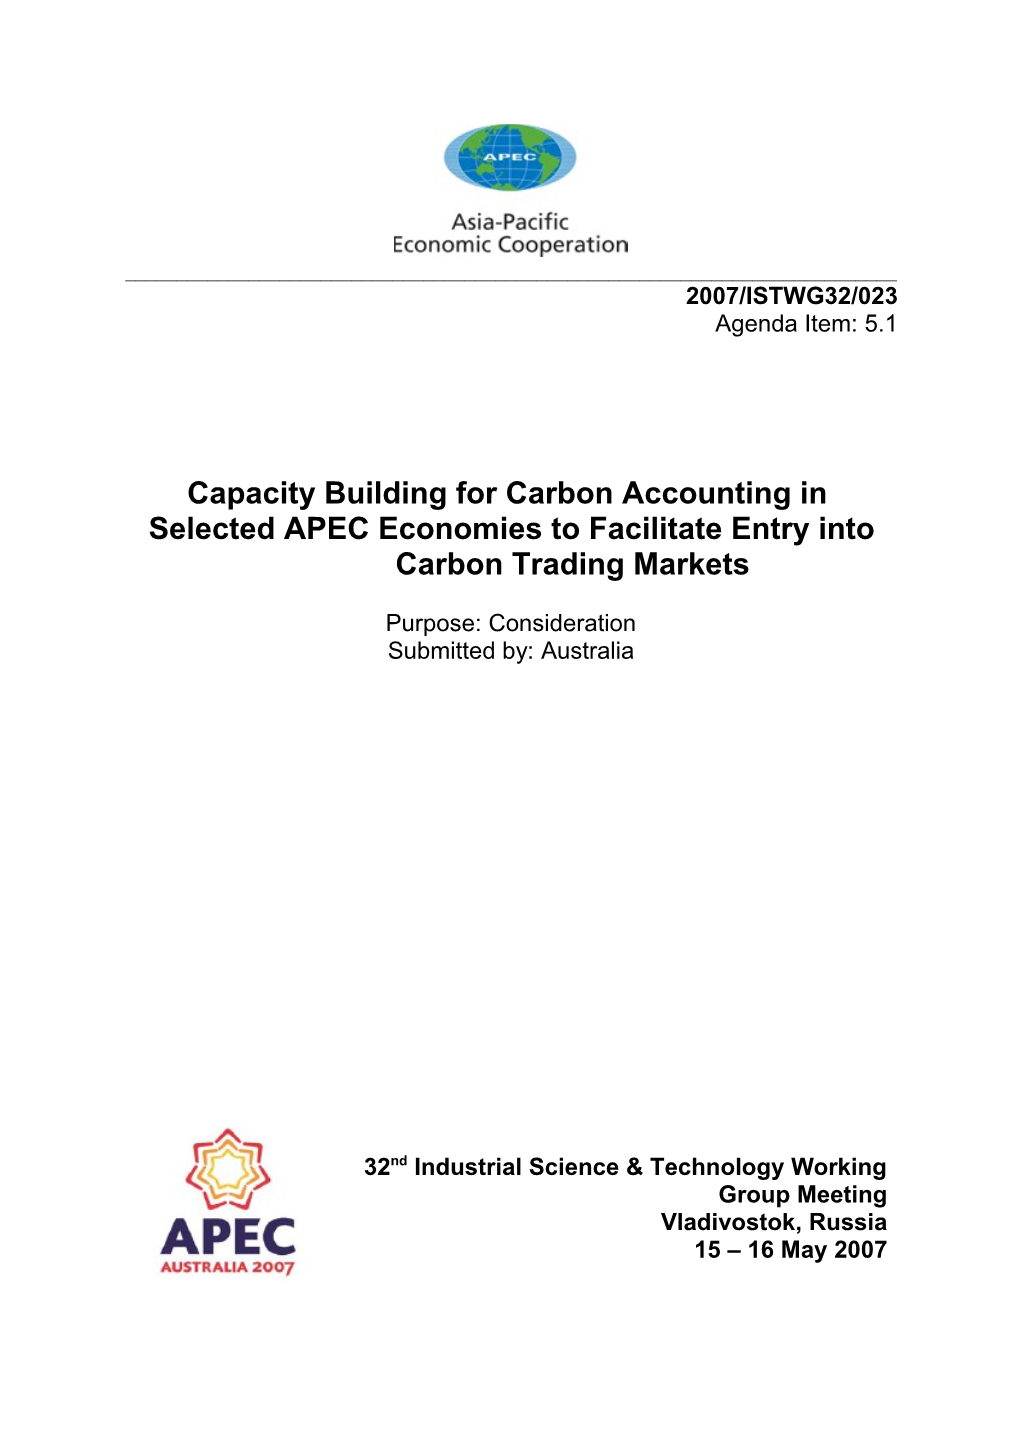 Capacity Building for Carbon Accounting (Australia)